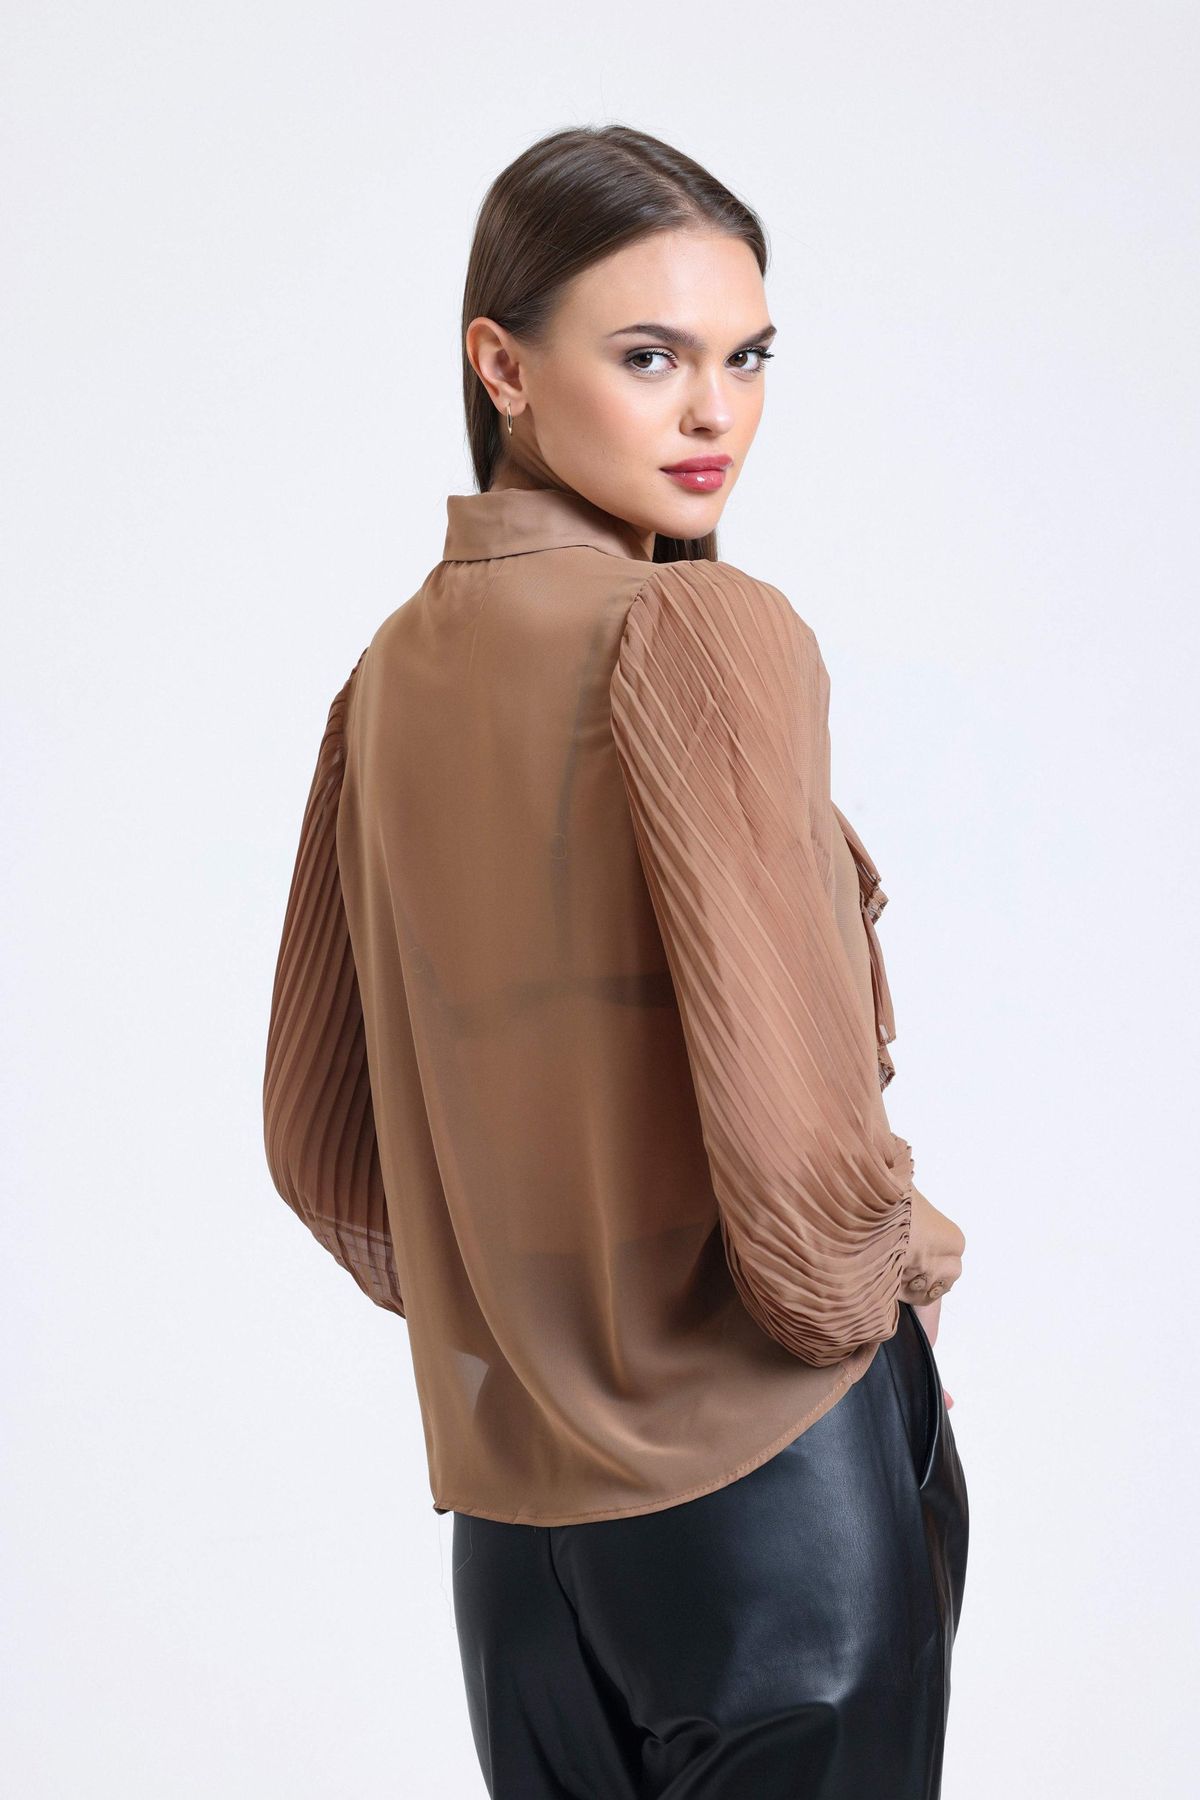 Chiffon Shirt with a Bow Details on the Neck